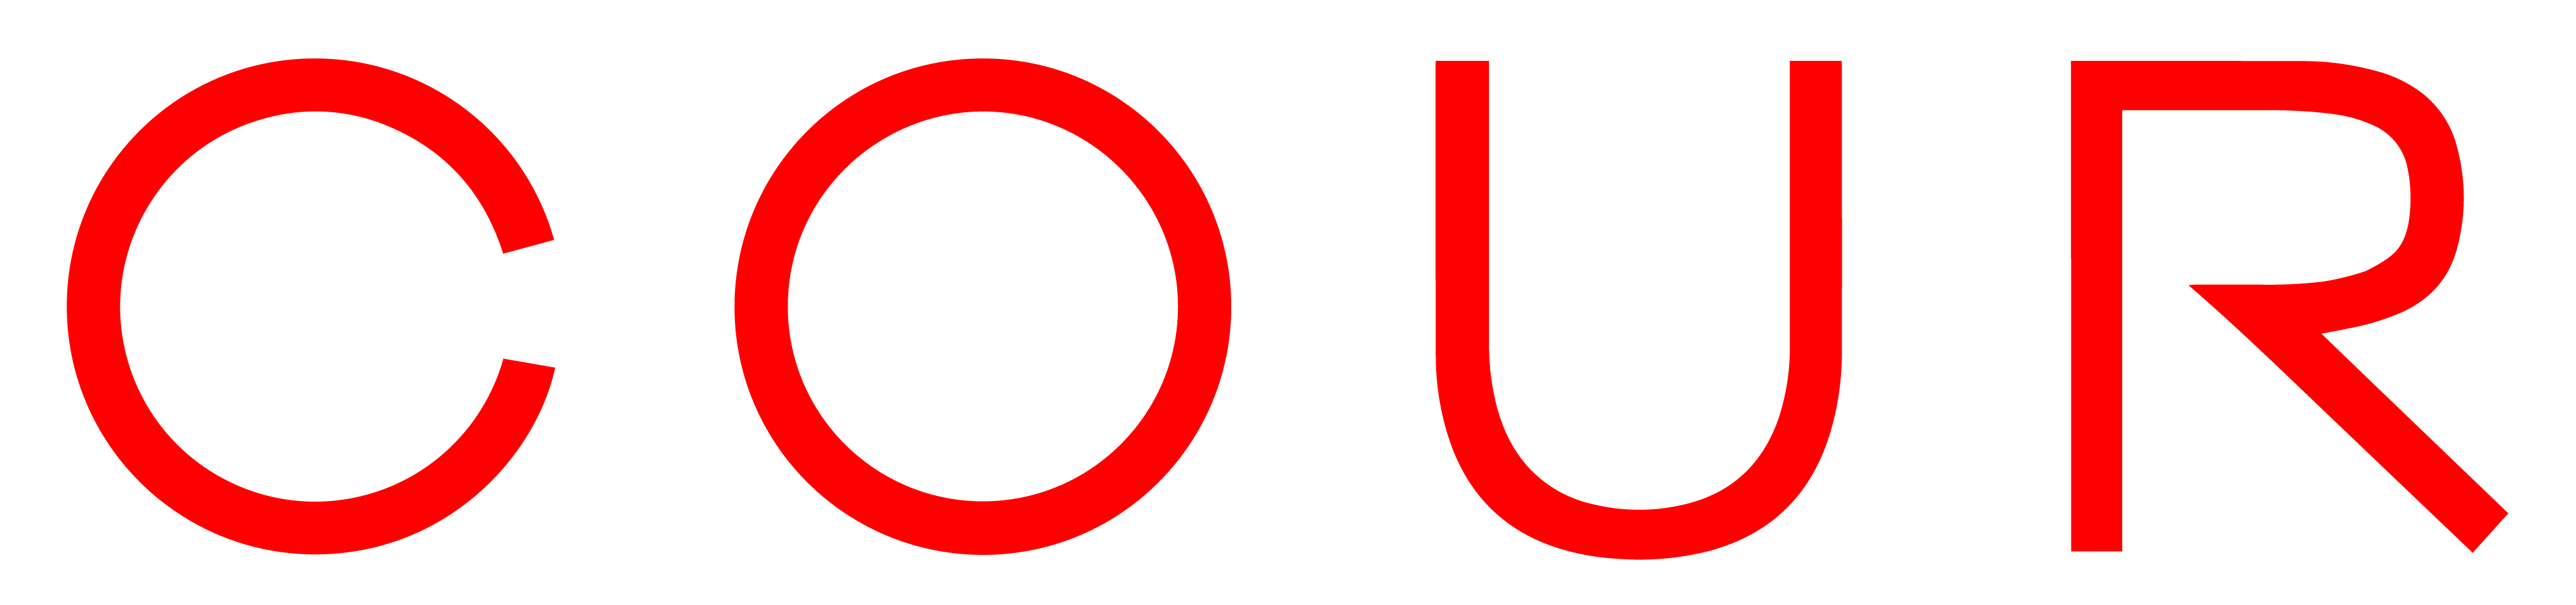 Cour Logo (1).png